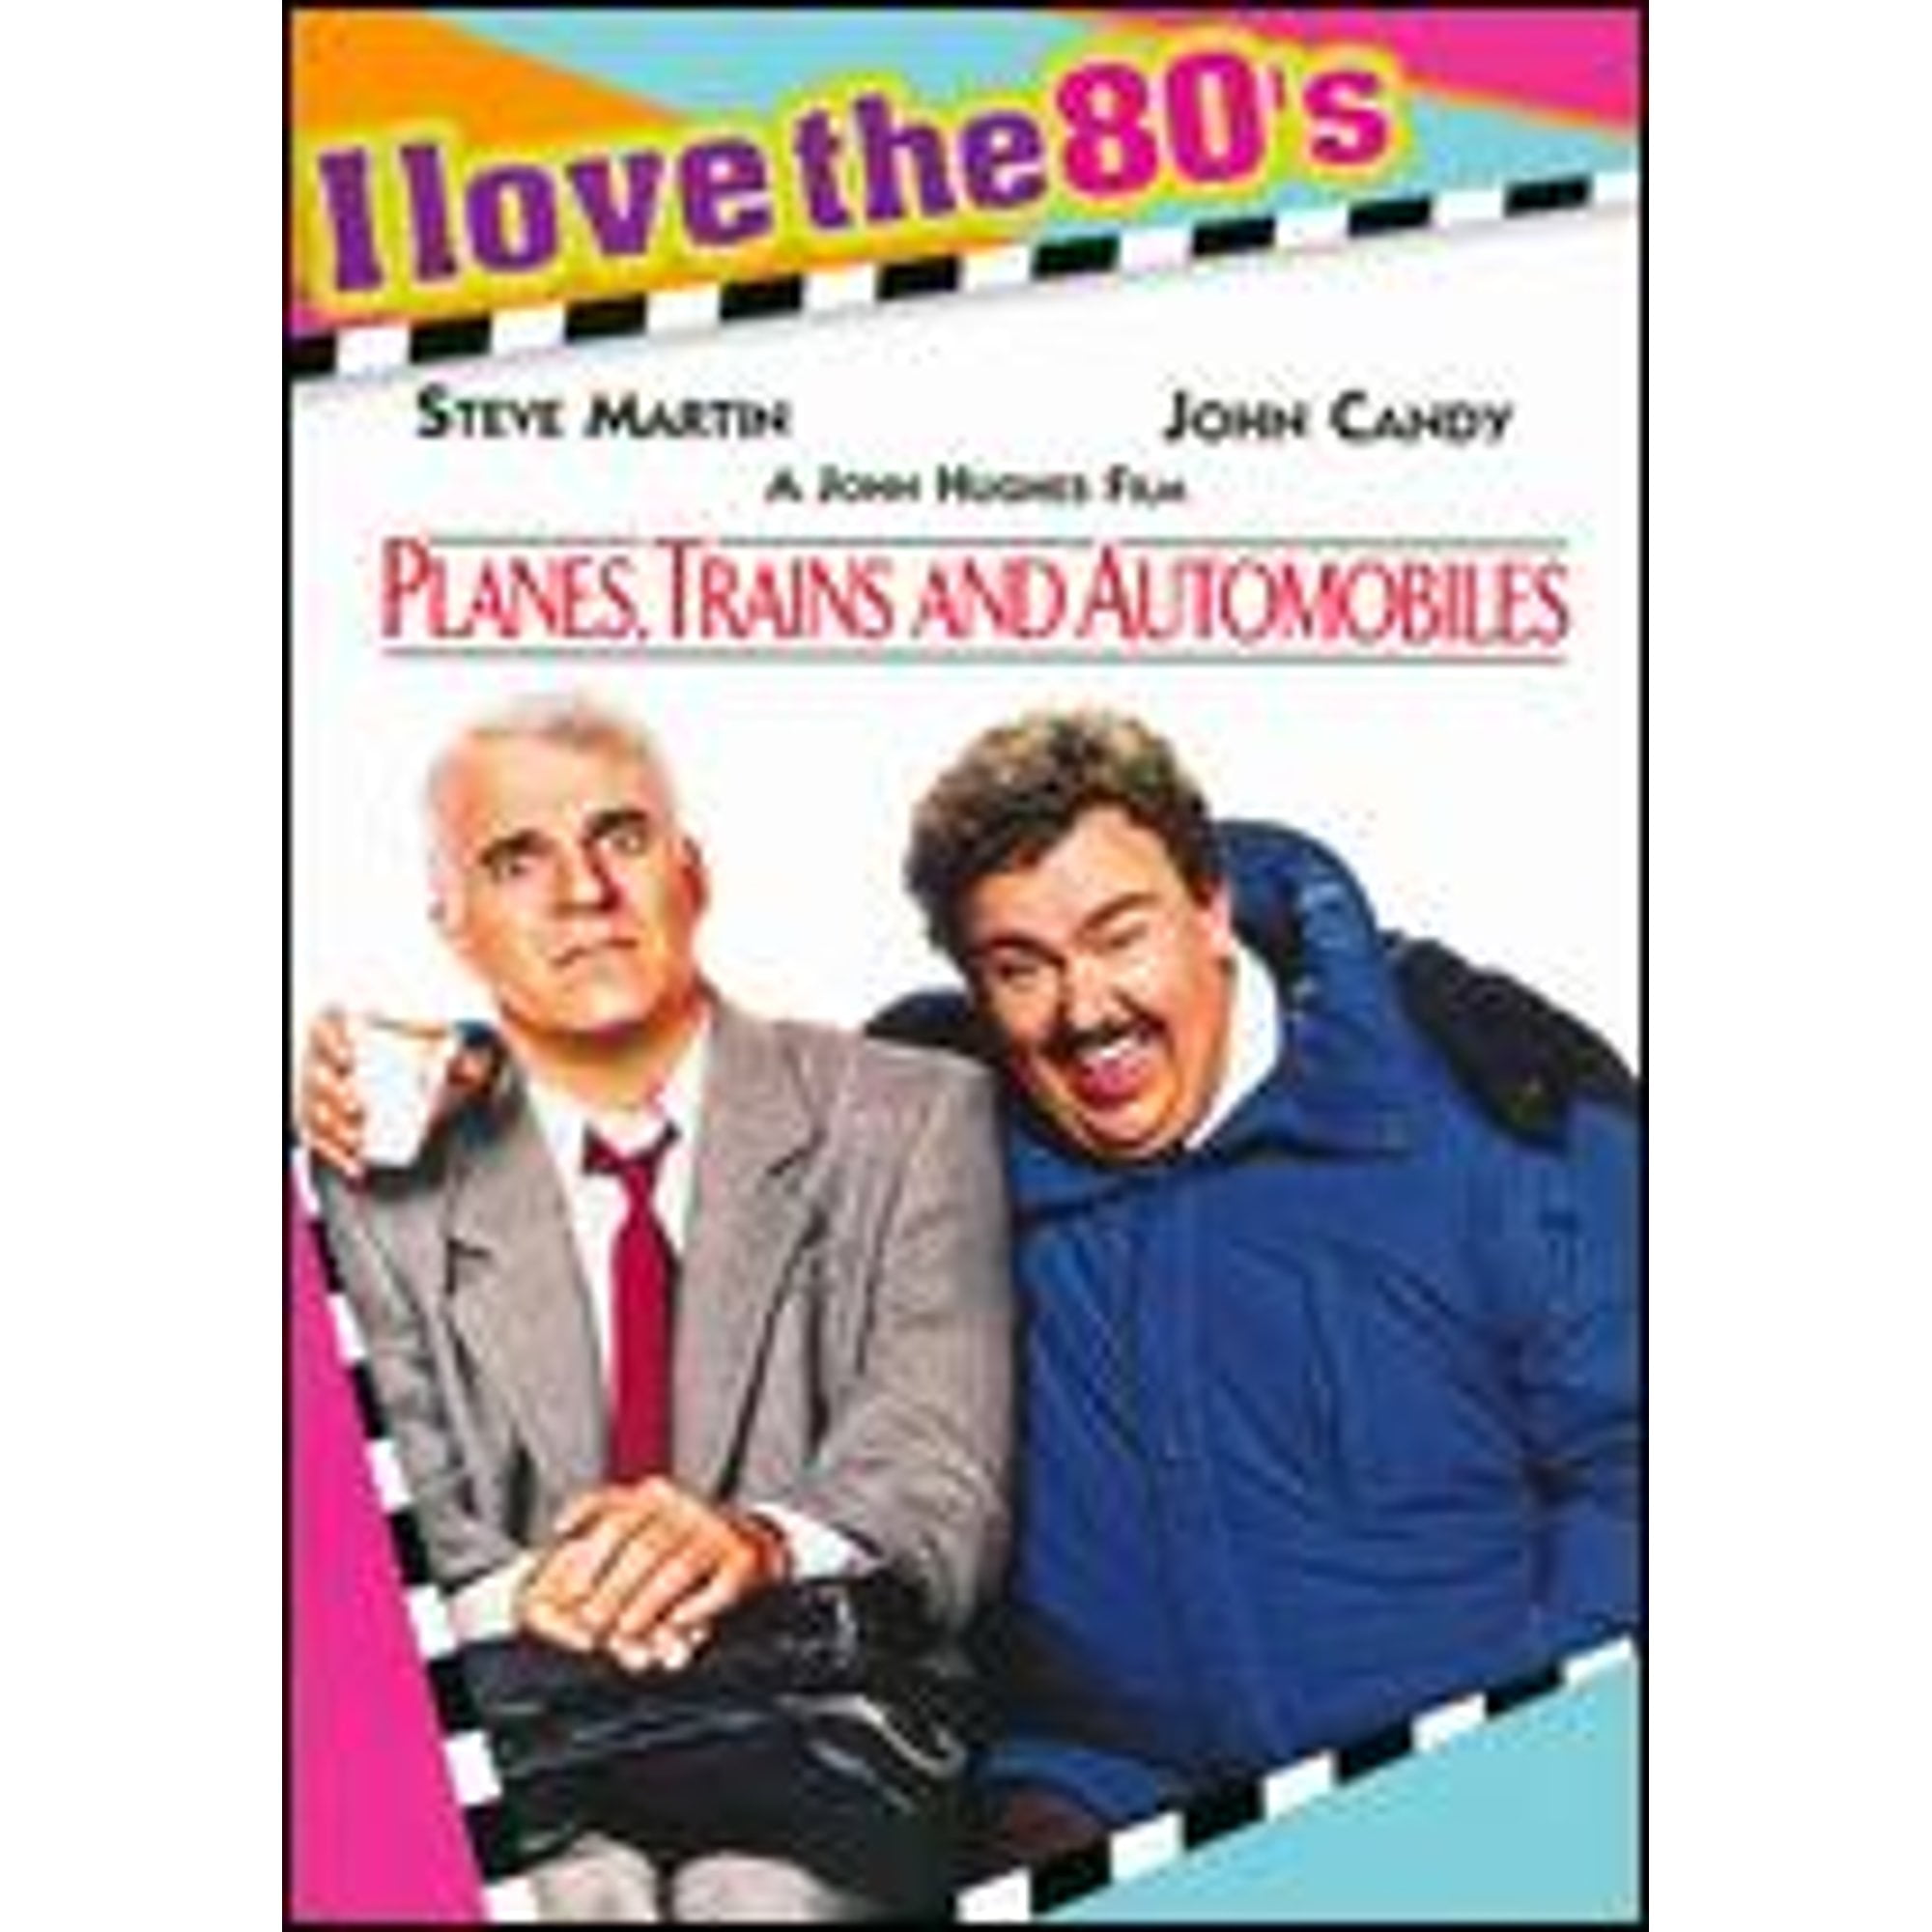 Pre-Owned Planes, Trains and Automobiles [I Love the 80's Edition] (DVD 0097361380346) directed by John Hughes